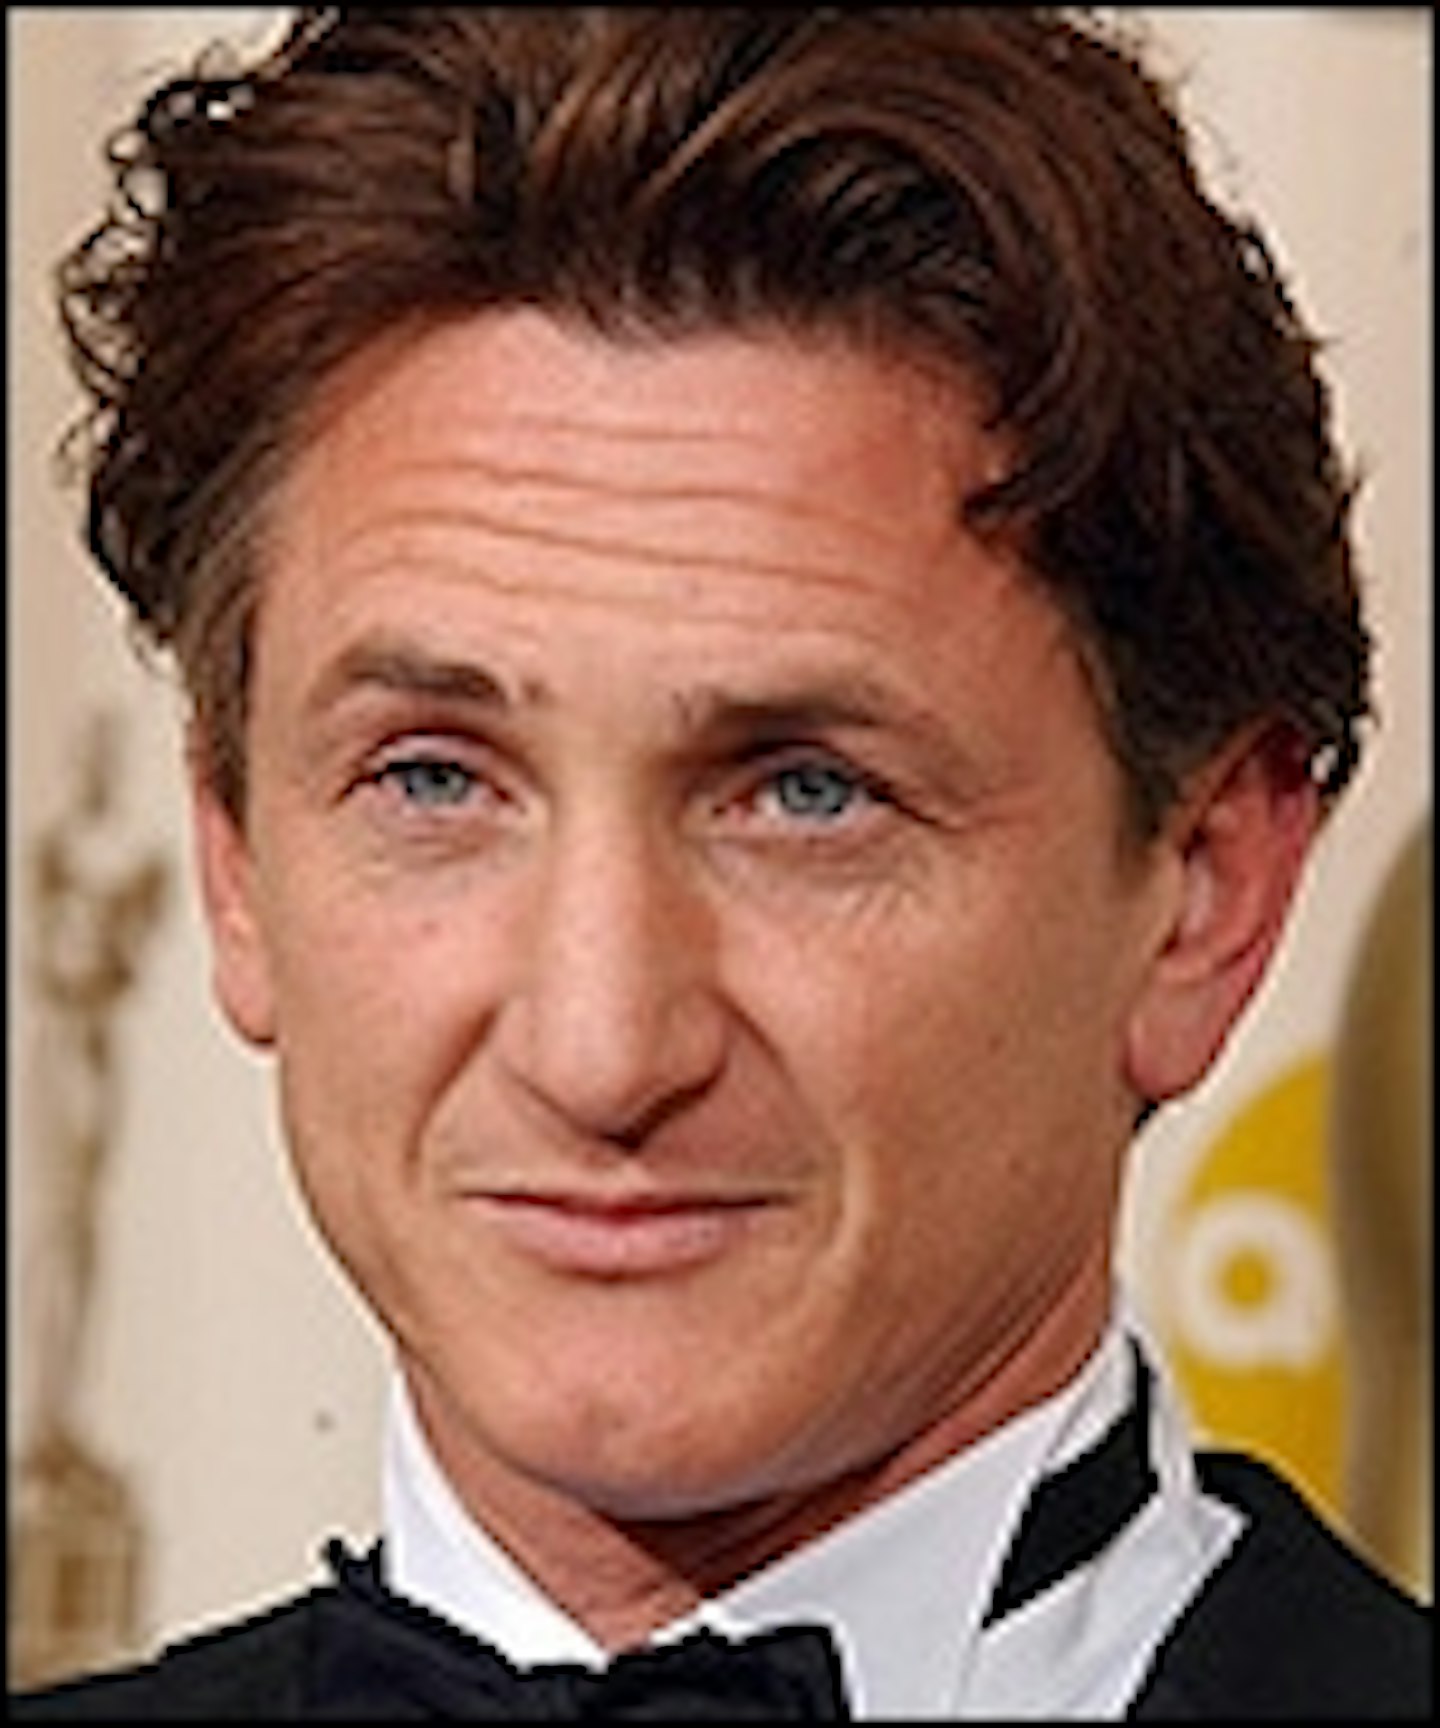 Is Sean Penn A Stooge Once More?